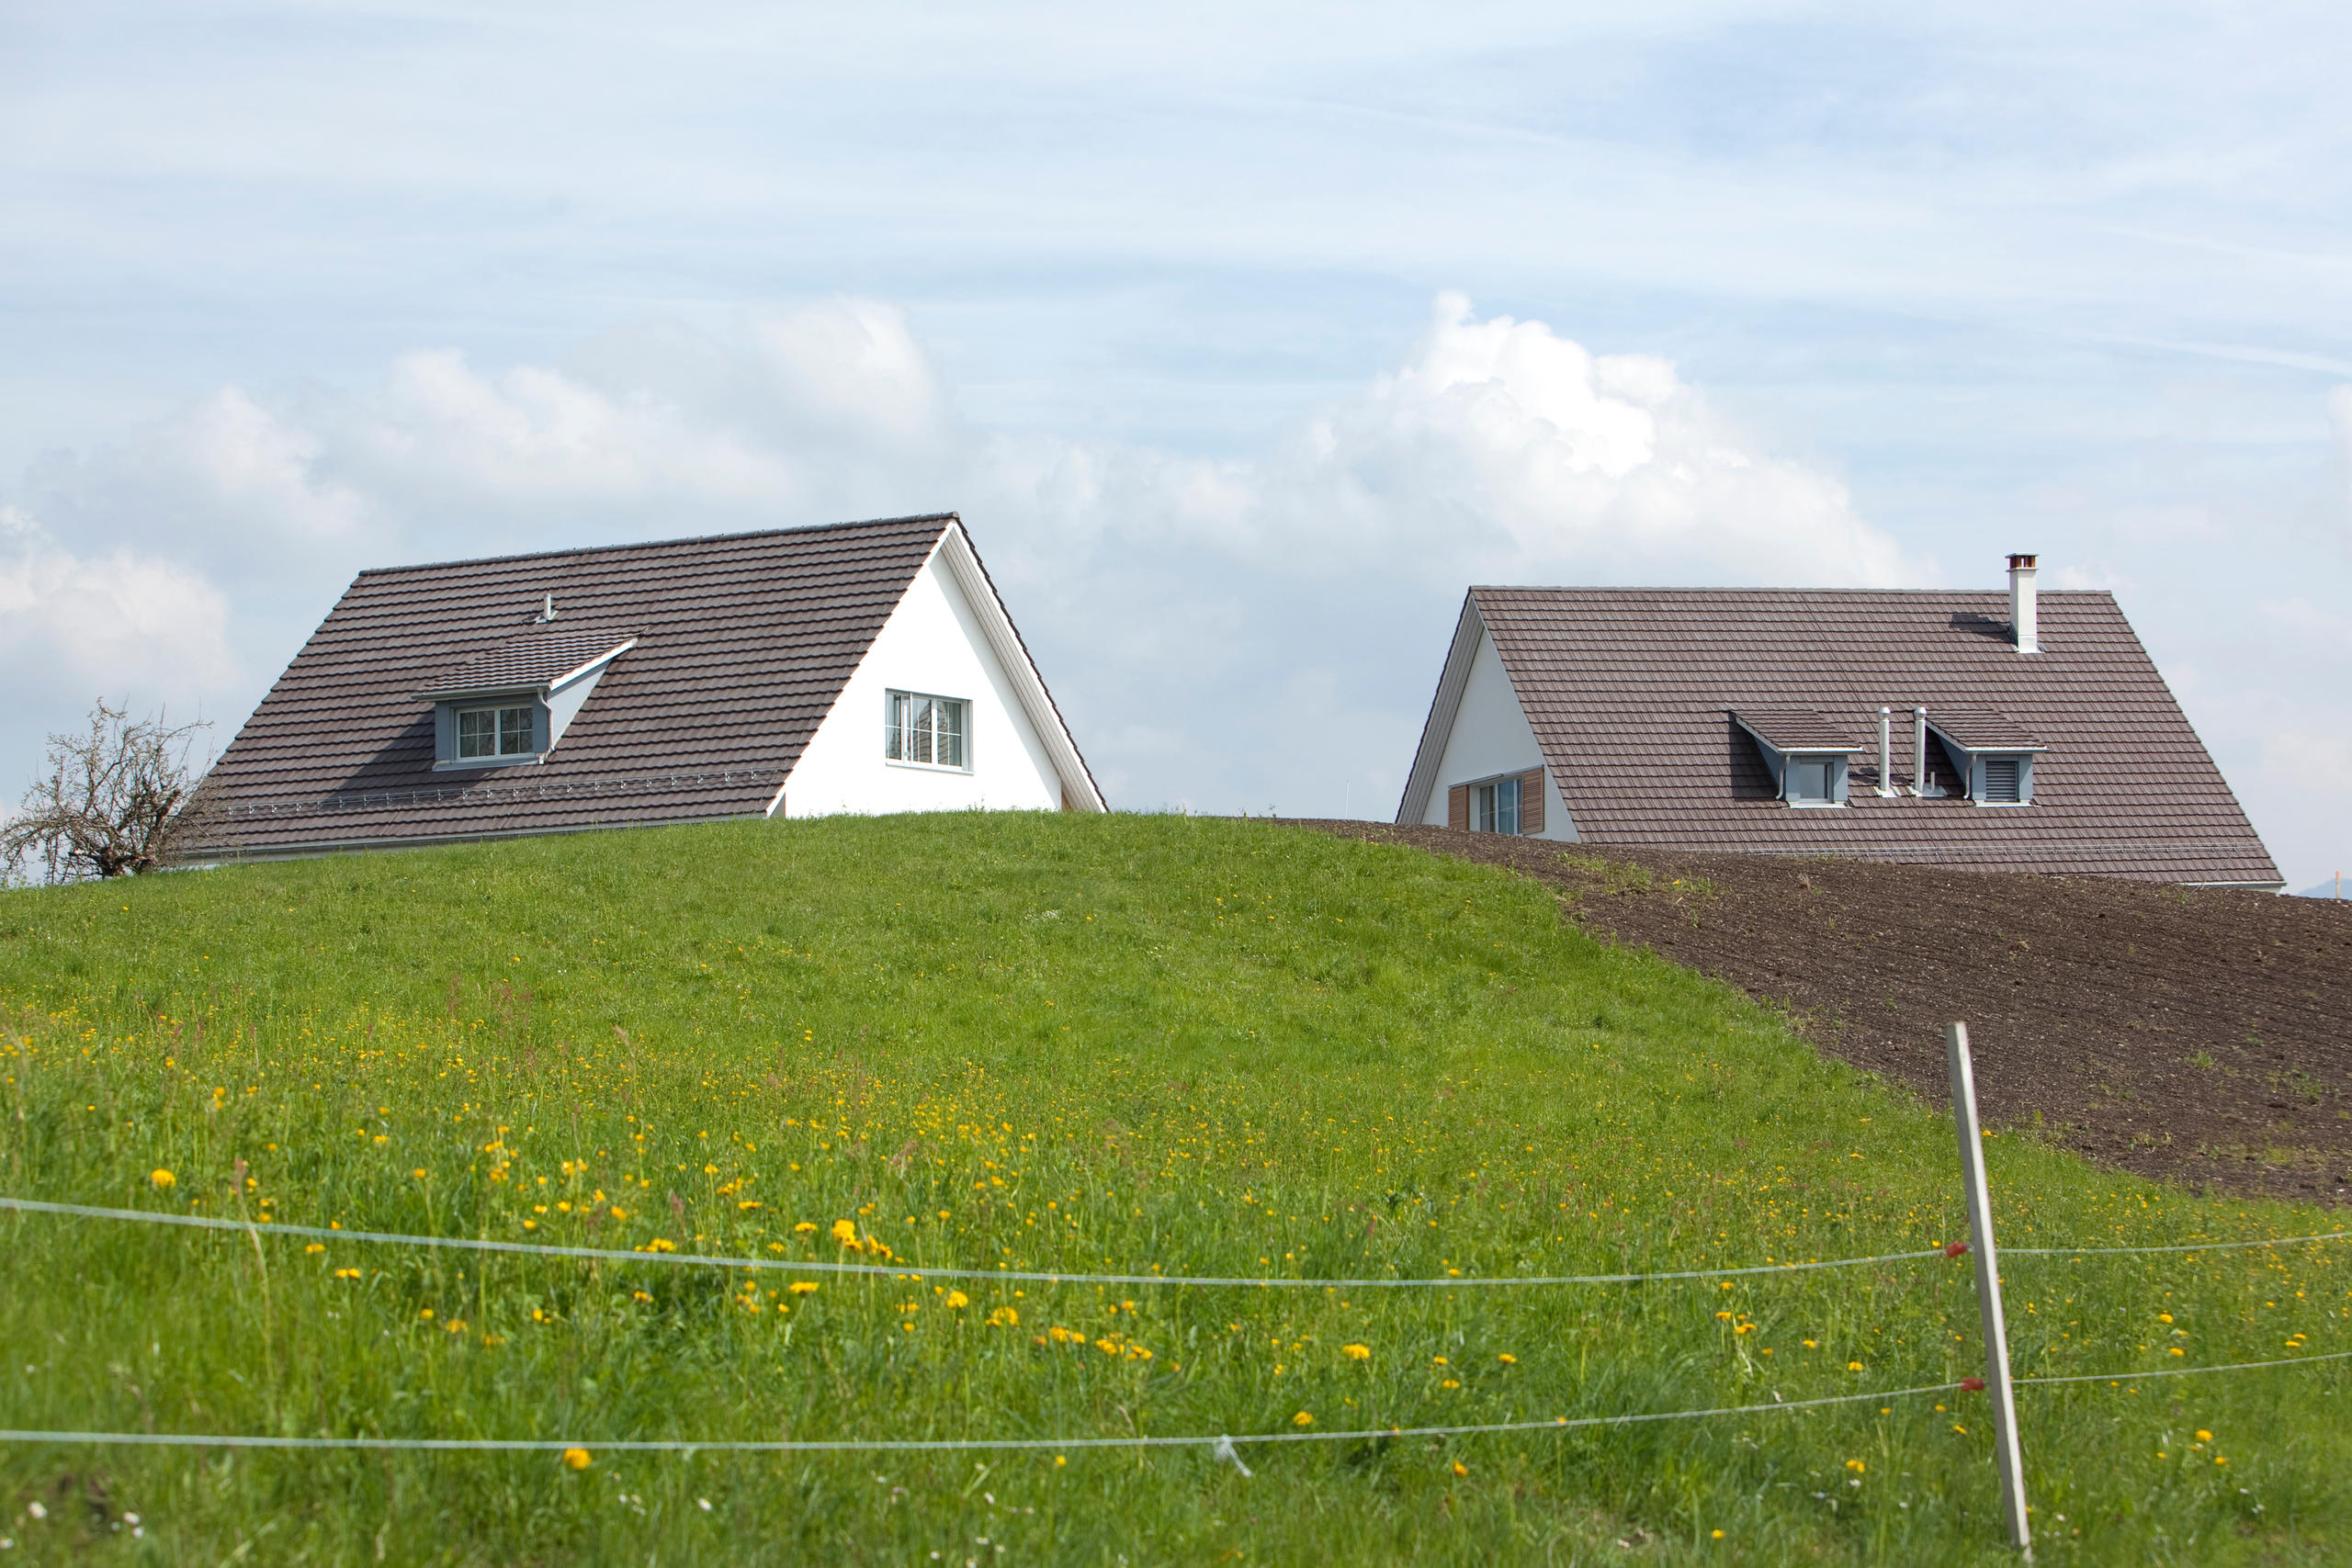 Two single detached houses behind a hill